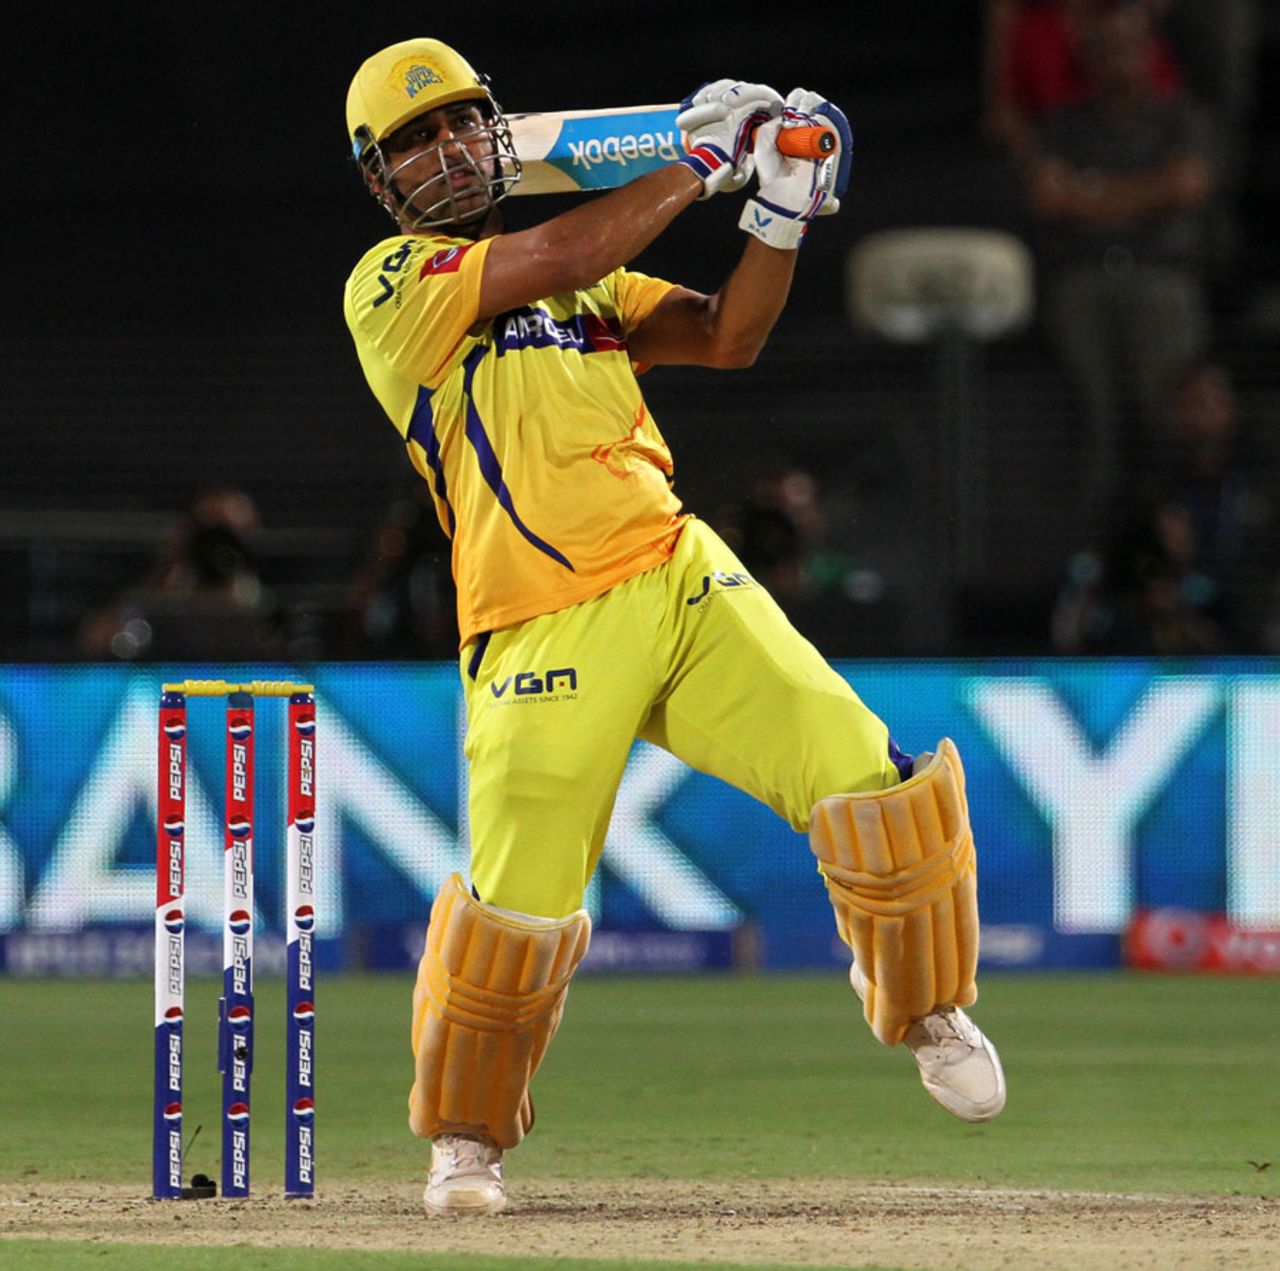 MS Dhoni hits one out of the screws, Pune Warriors v Chennai Super Kings, IPL, Pune, April 30, 2013